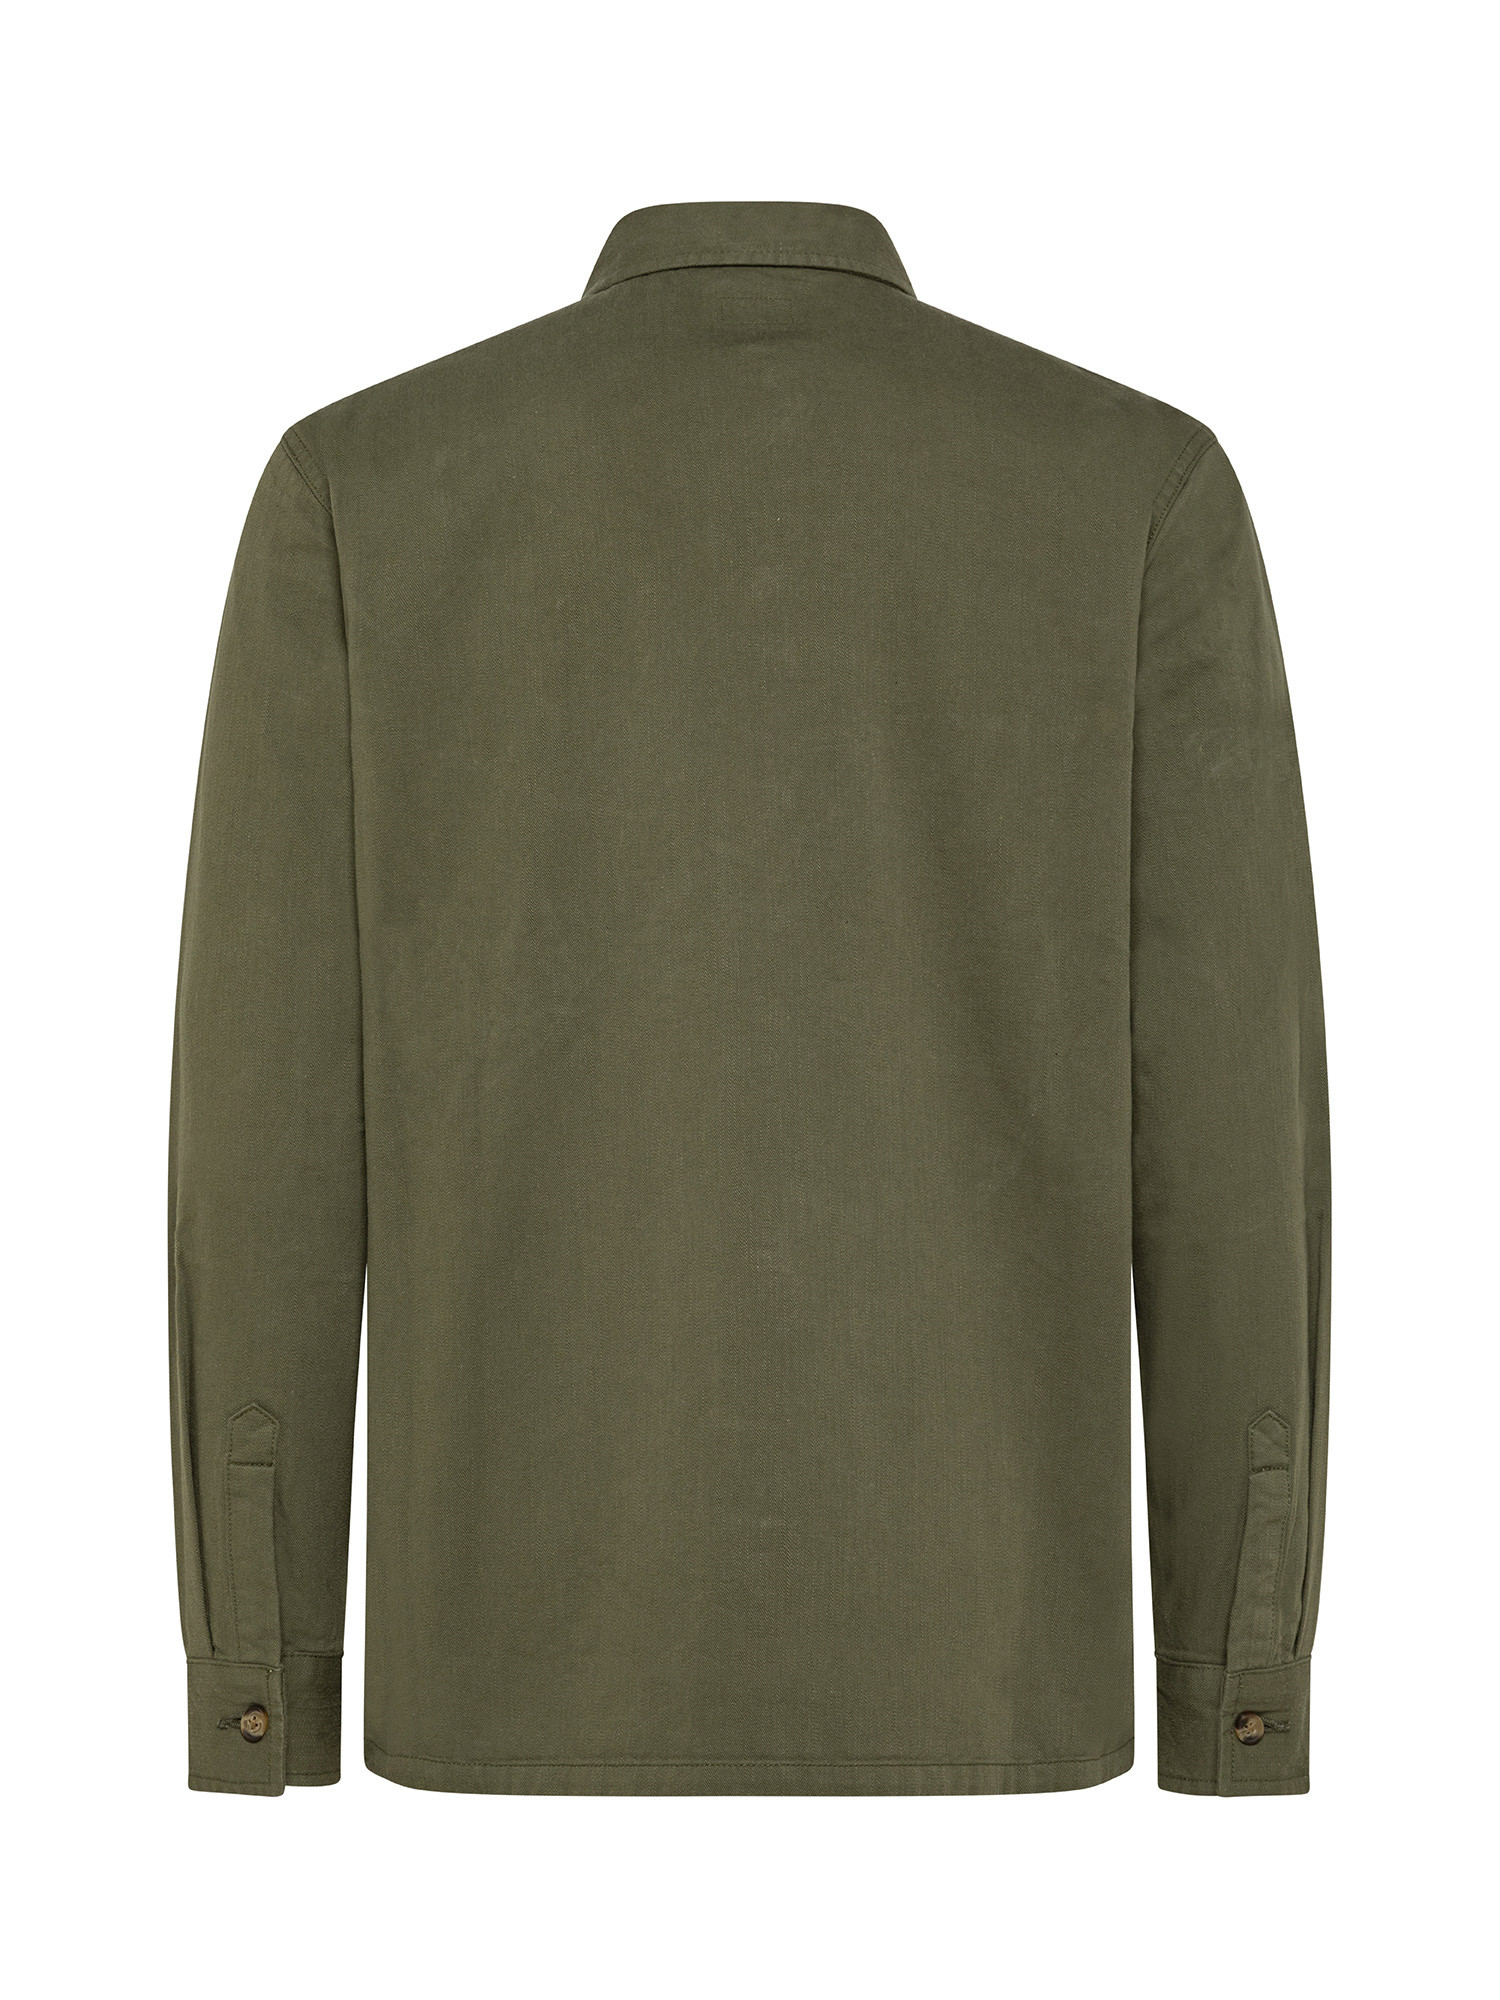 Oversized shirt in canvas, Green, large image number 1